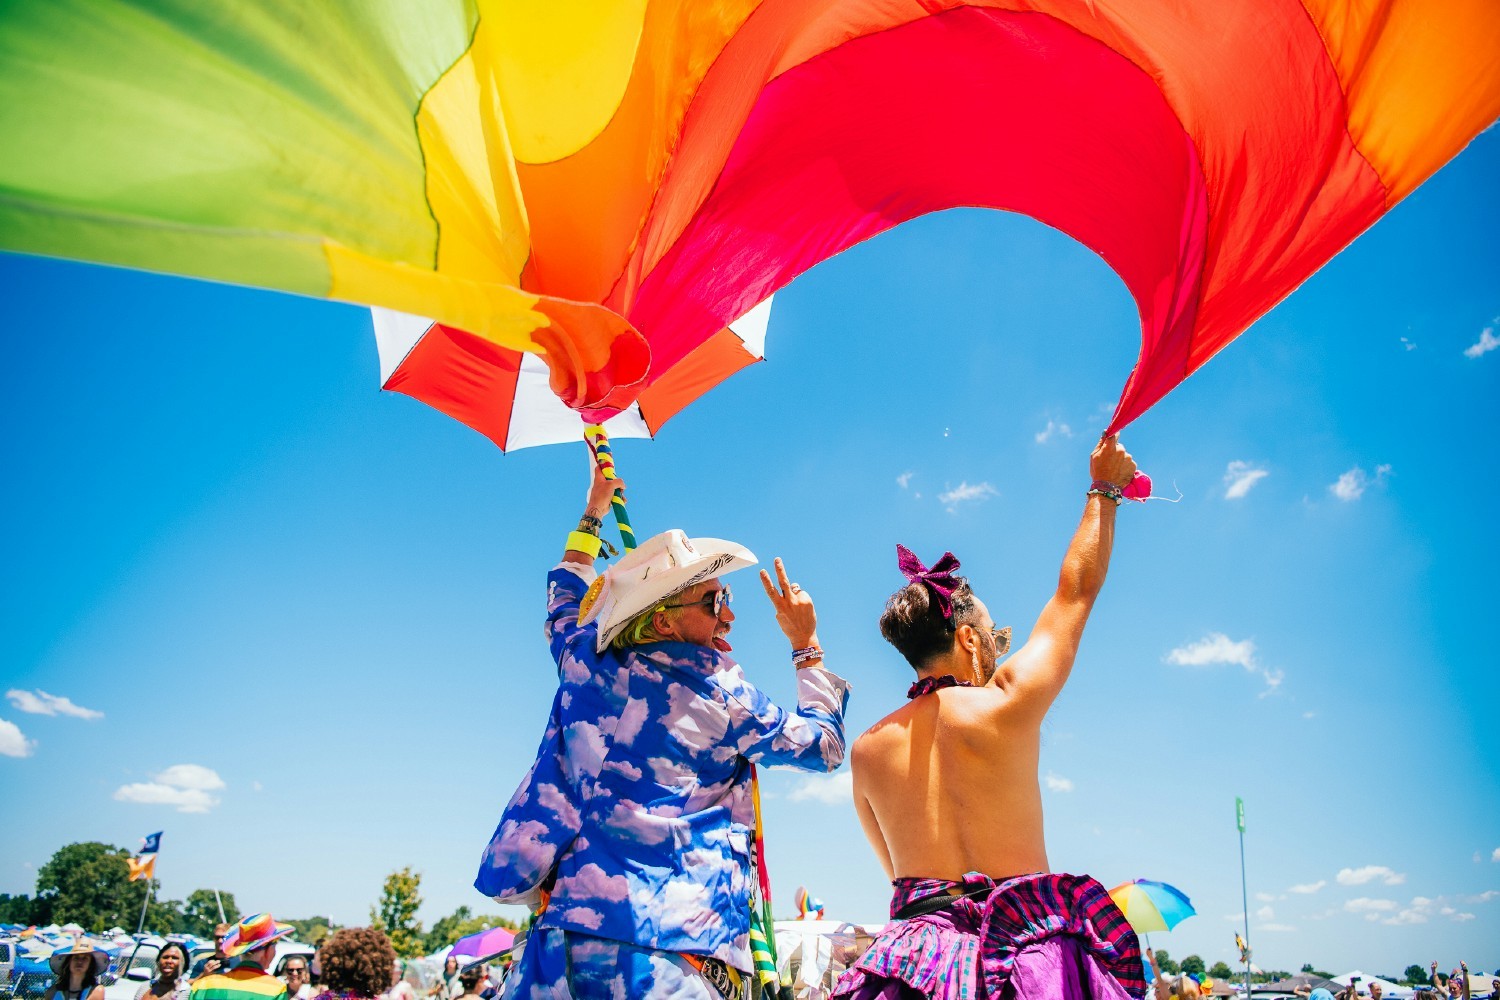 Pride Parade held during C3 Presents’ festival, Bonnaroo, in Manchester, Tennessee

